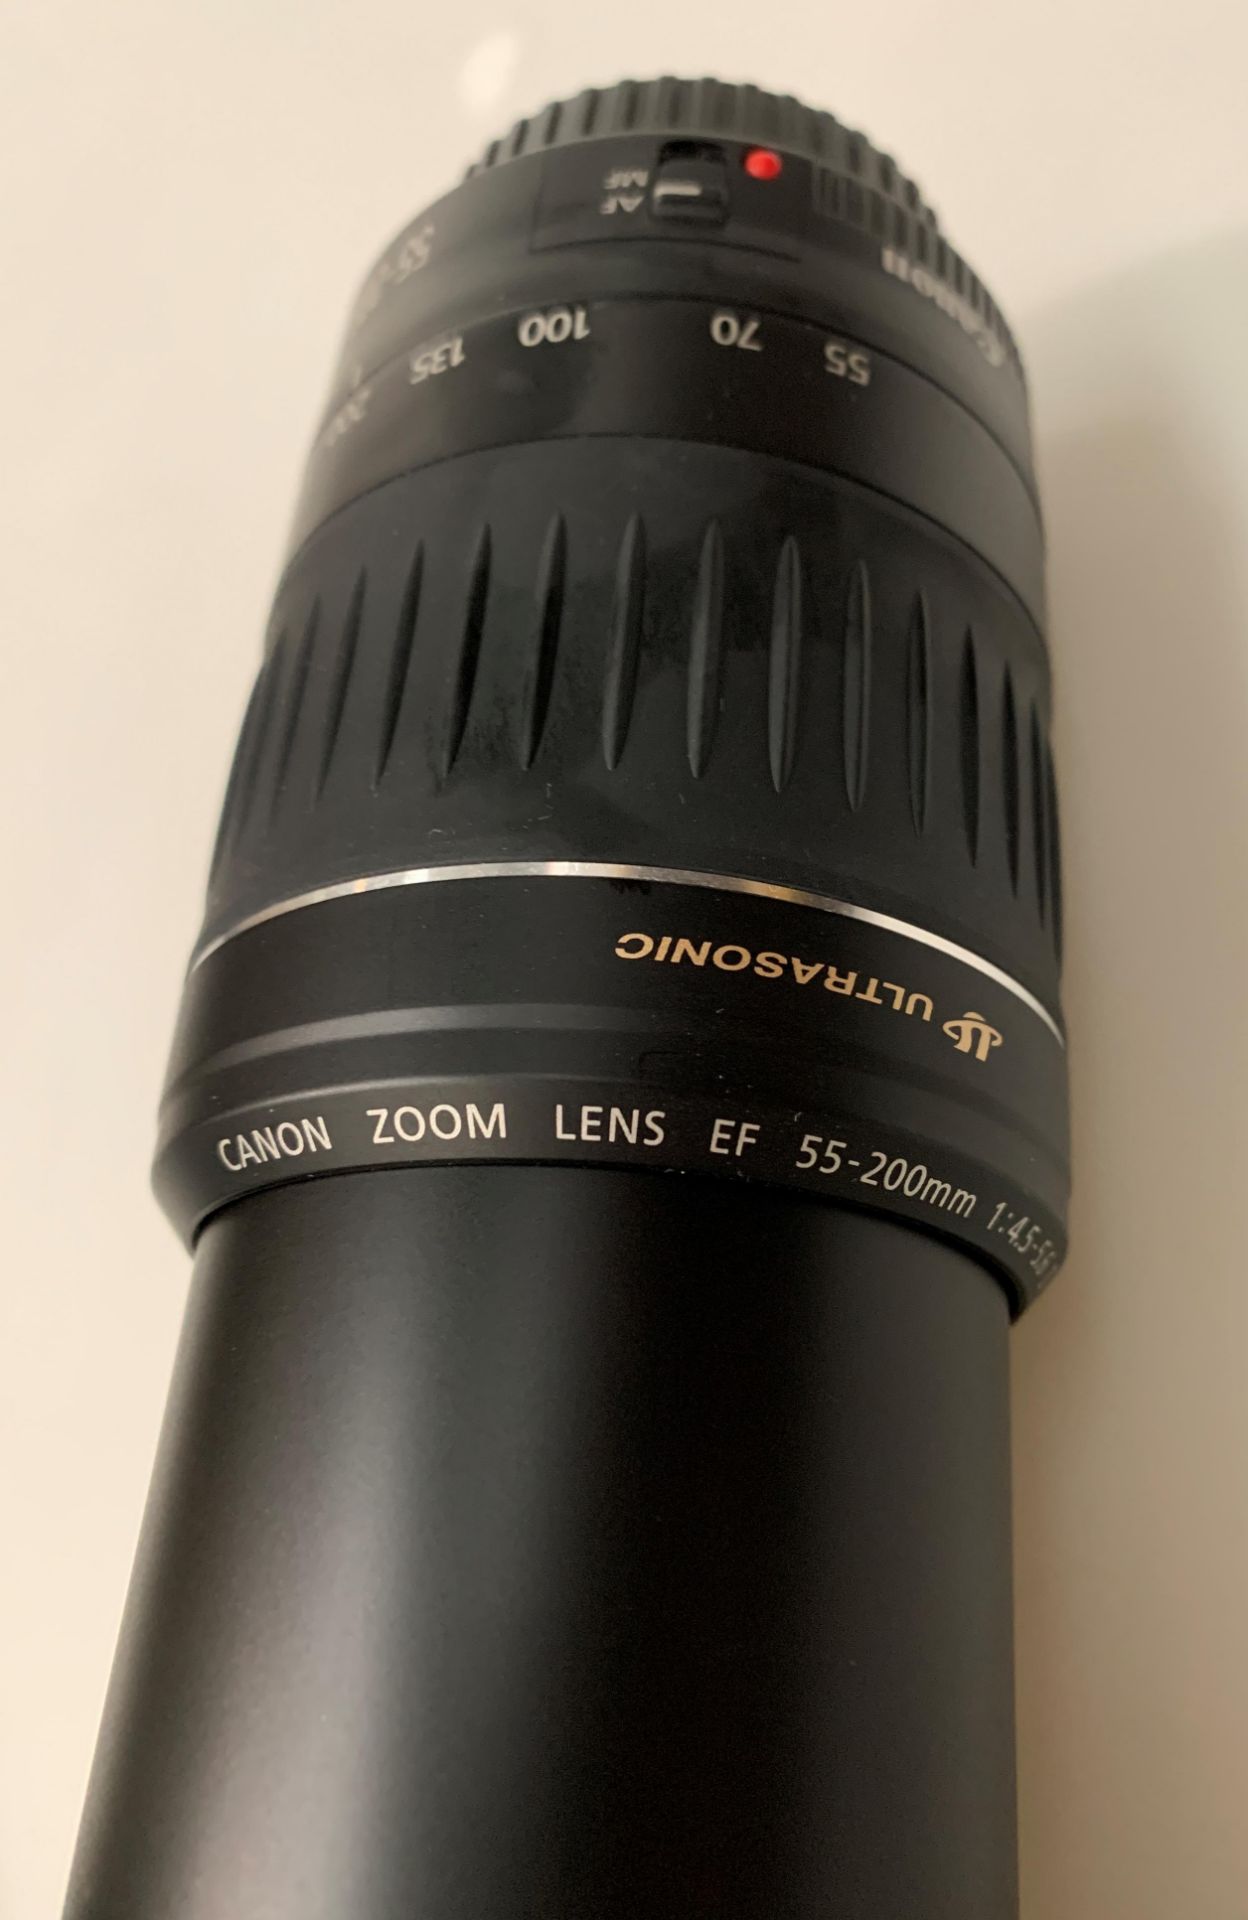 Canon Zoom lens EF 55-200mm complete with Lowepro Case - Image 2 of 4